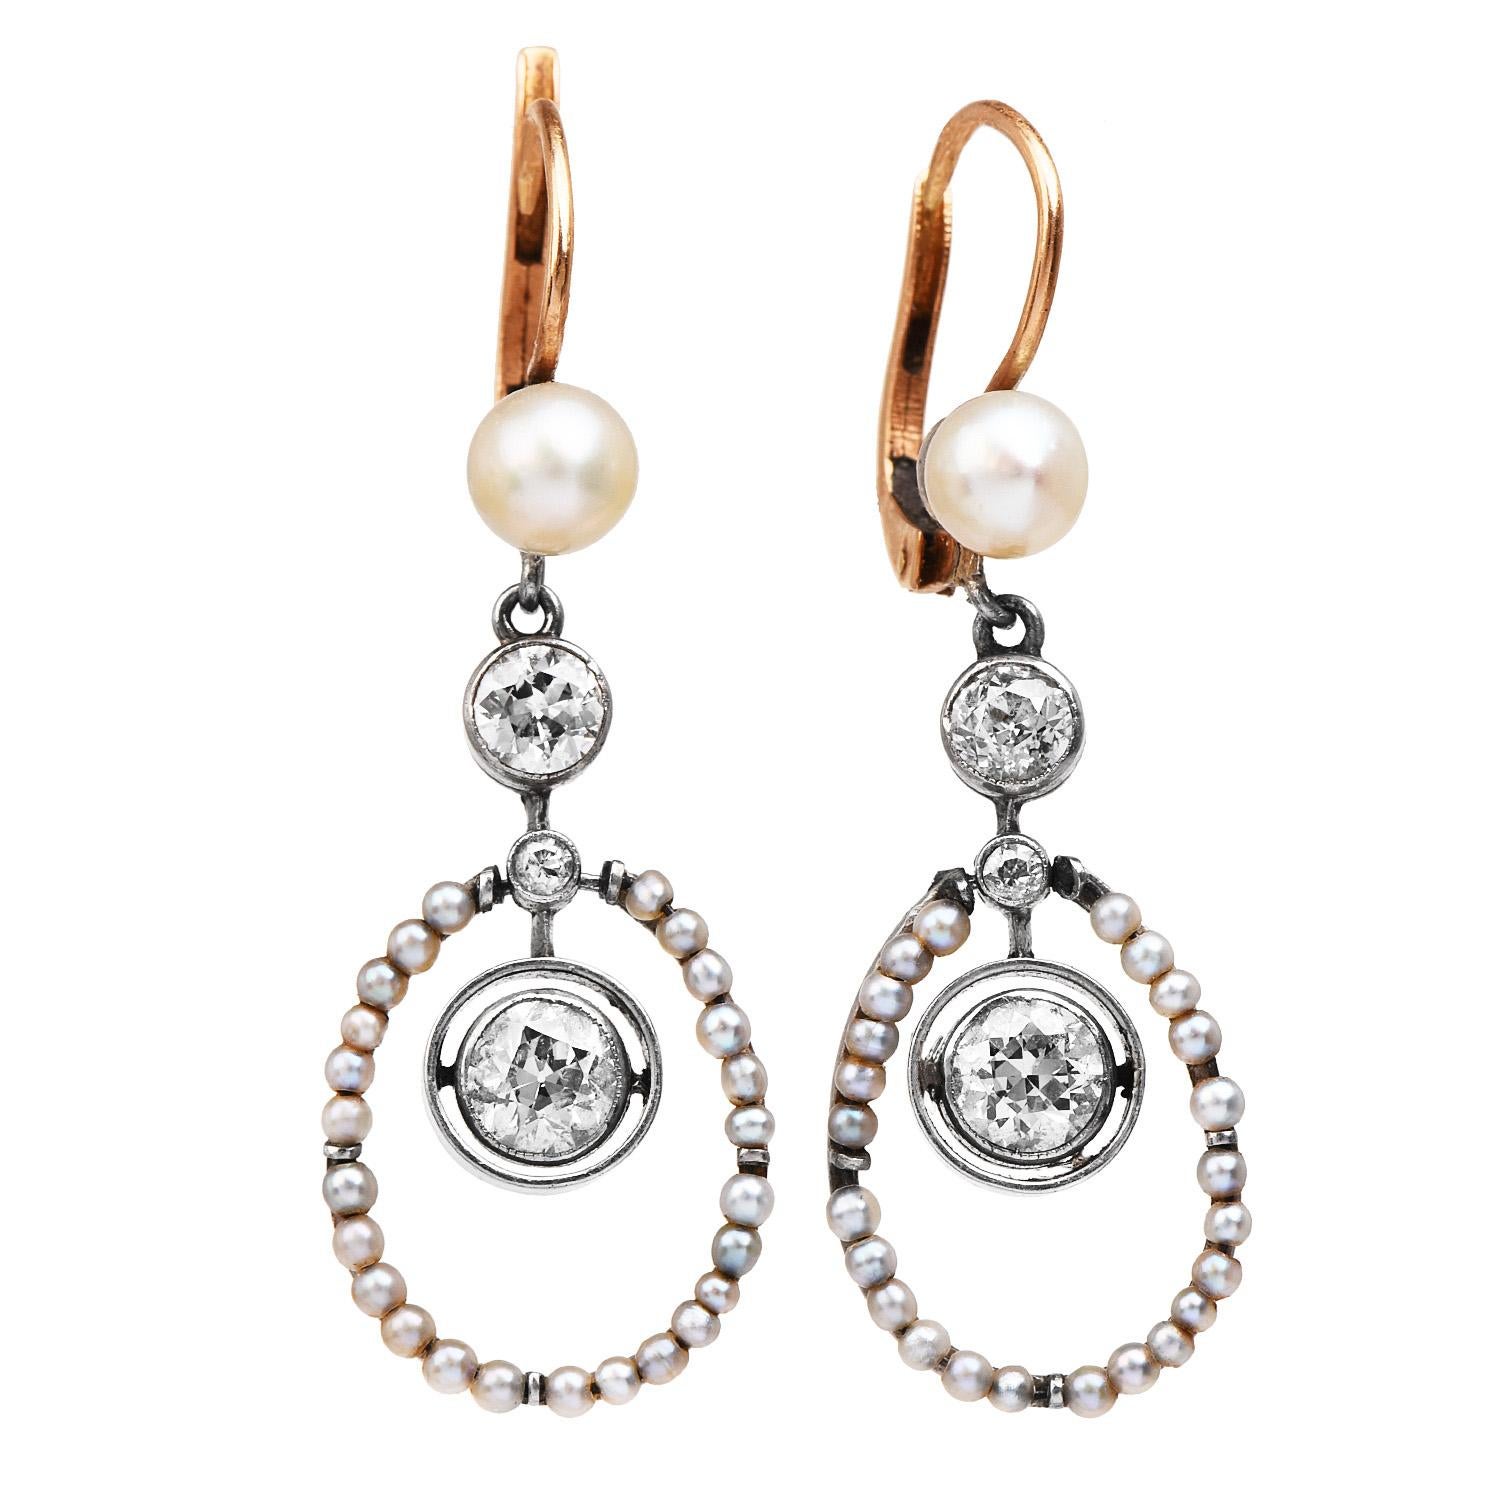 Exquisite Victorian Style antique diamond earrings are from circa the 1930s.

They display a halo design made of genuine seed pearls, measuring approximately 1.25 mm each and topped by two cream tone high luster pearls of 5 mm each.

Complementing